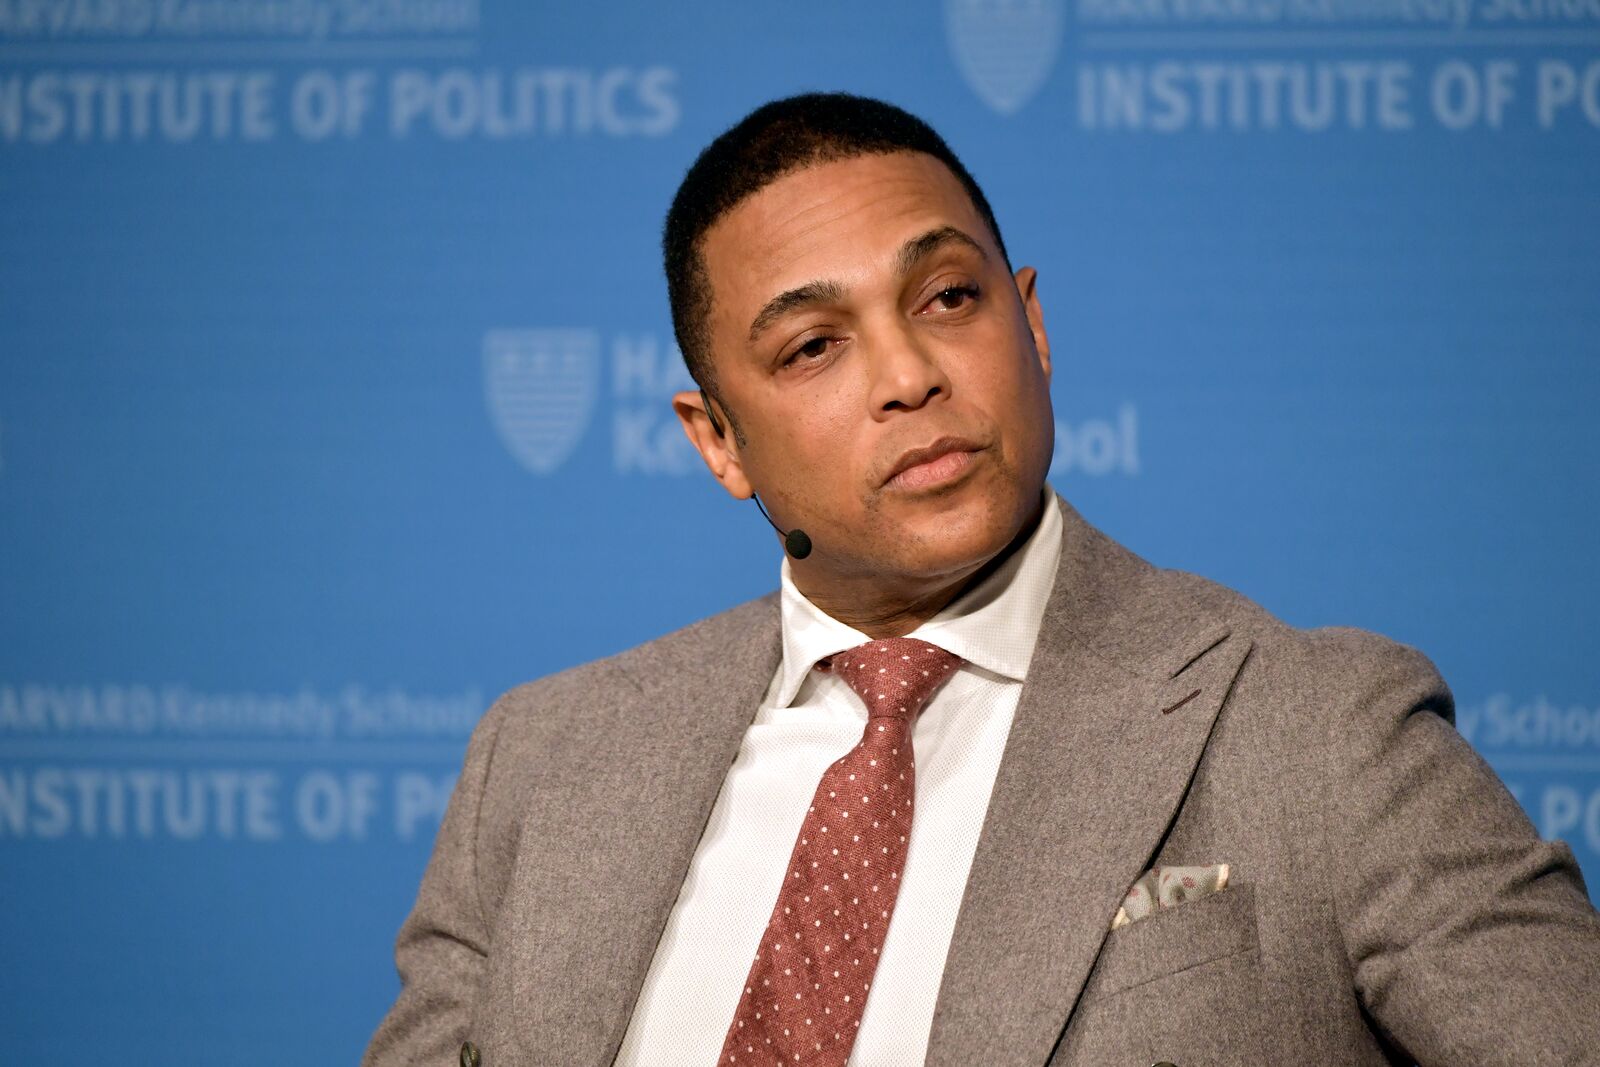 Don Lemon speaks onstage at Harvard University Kennedy School of Government Institute of Politics on February 22, 2019. | Photo: Getty Images